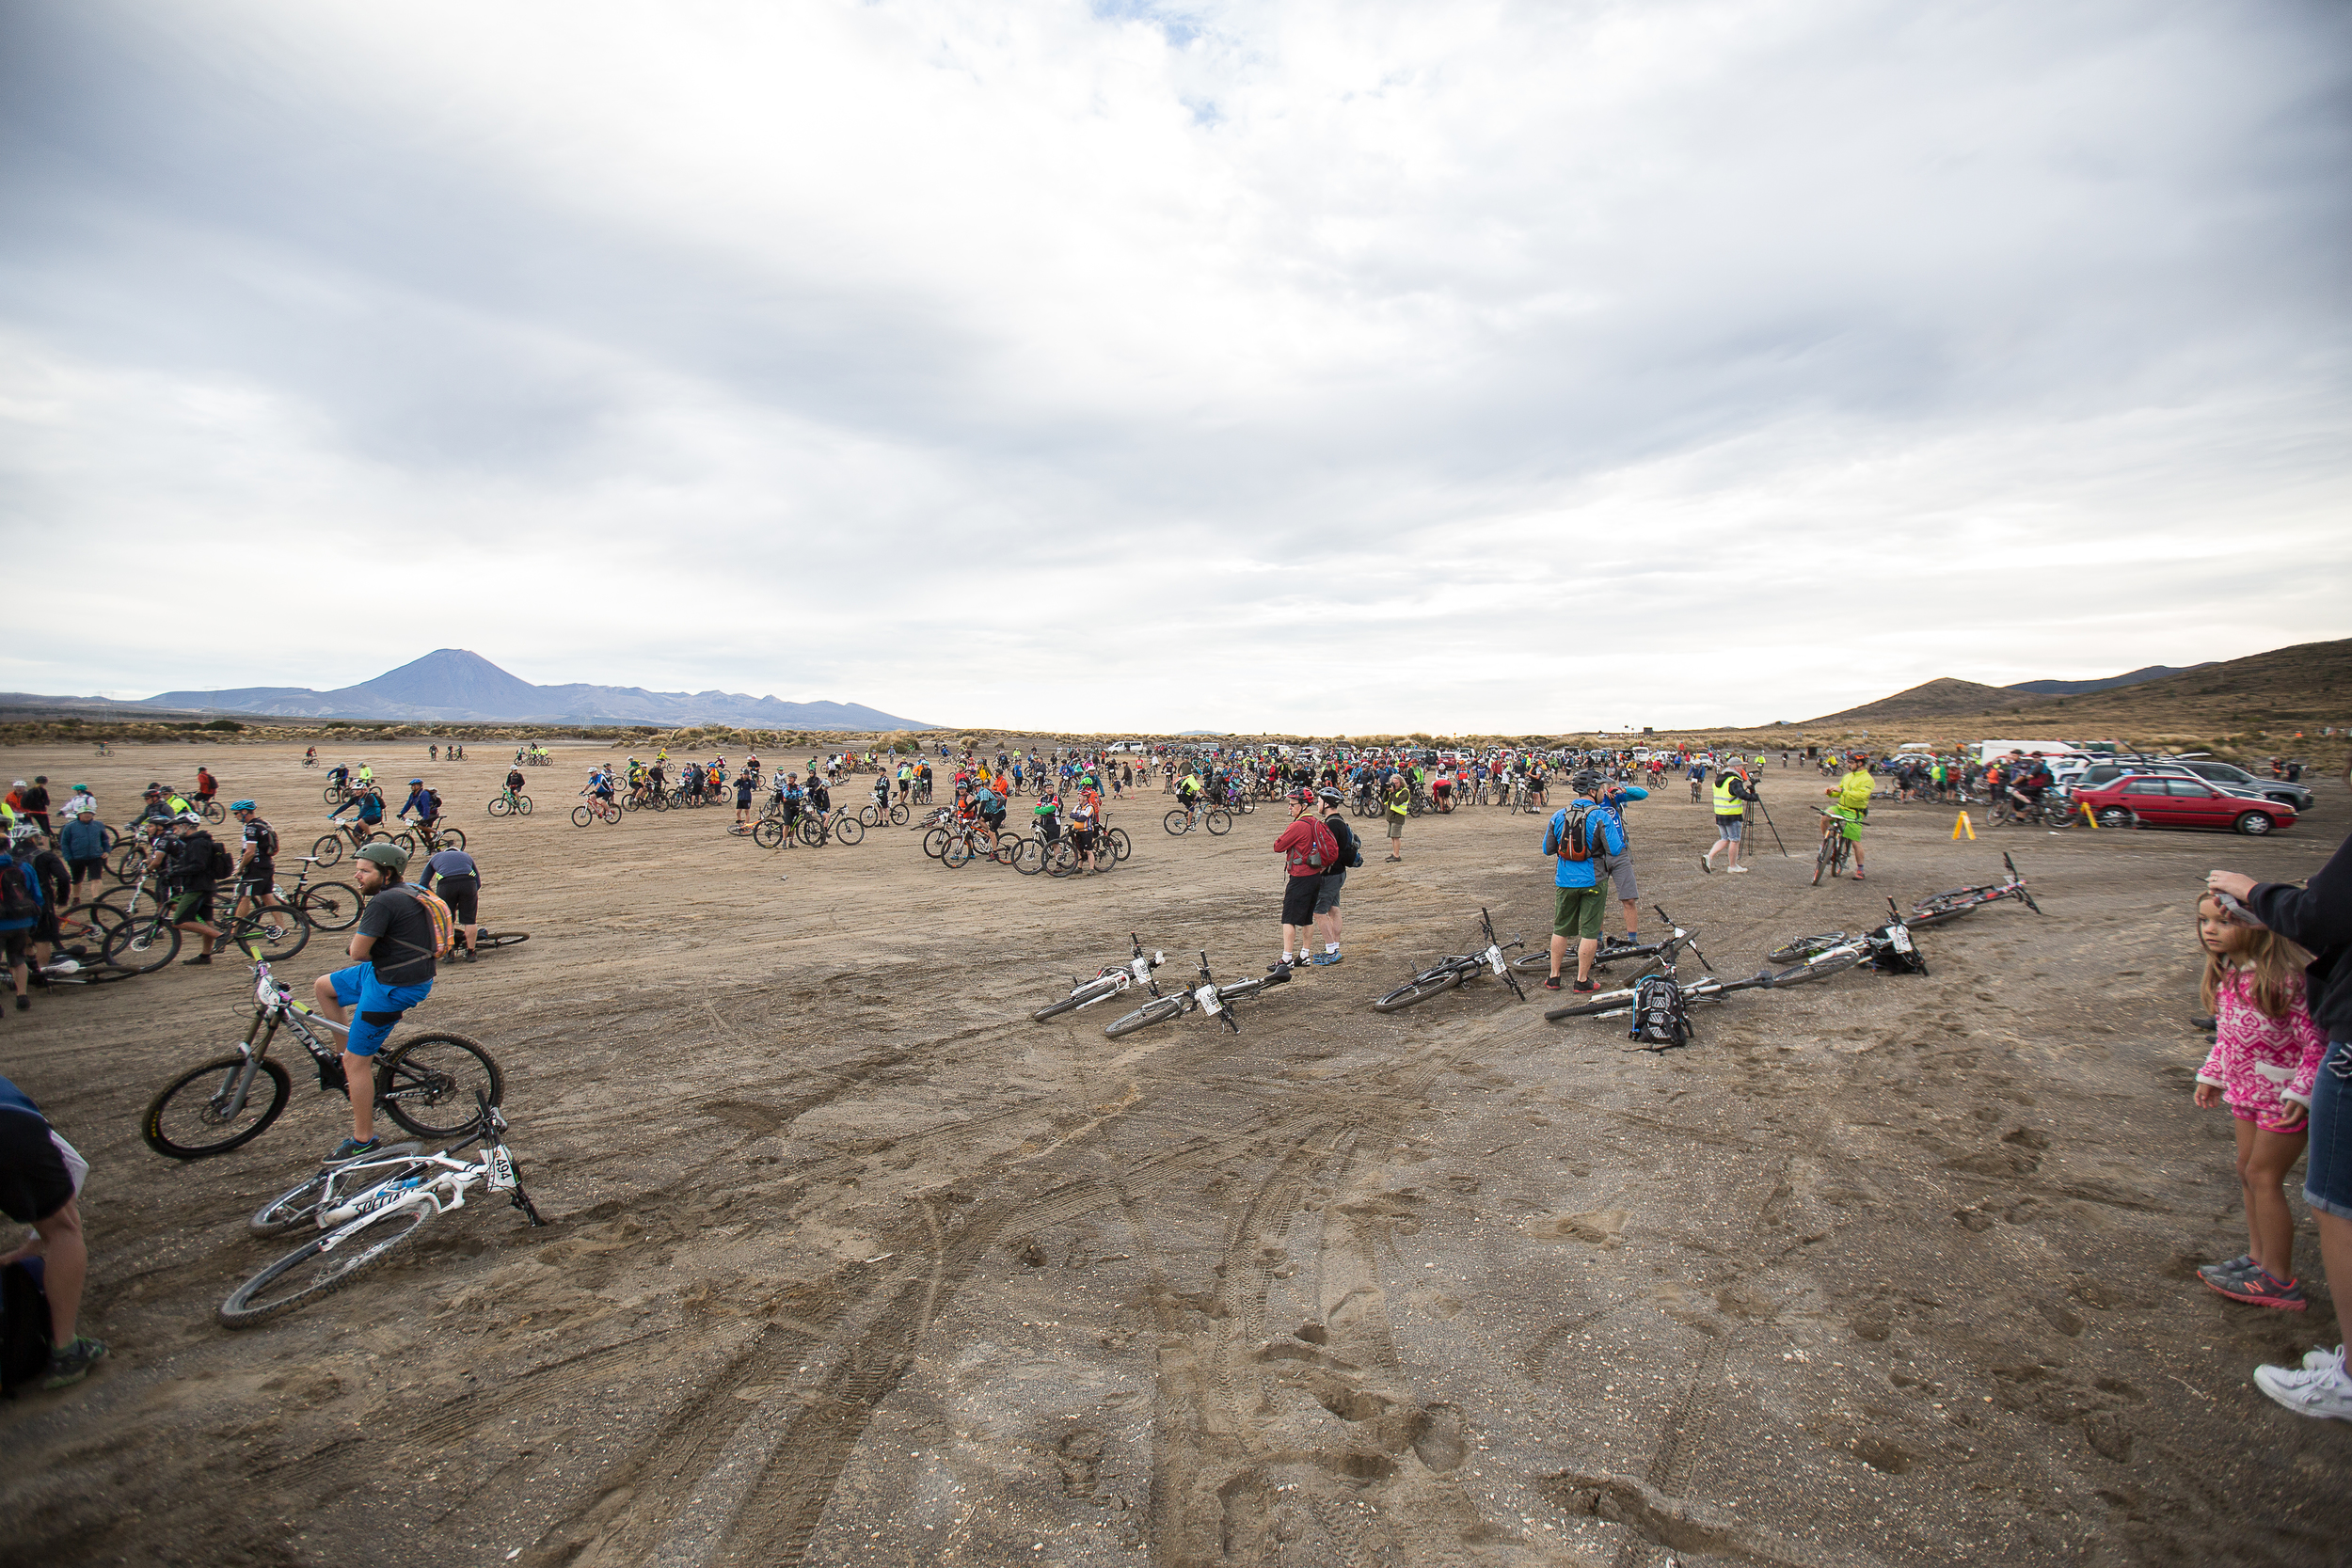 It was quite a sight to see over 500 riders milling about in the middle of the desert waiting for the 8:45am start. Mount Ngarahoe's volcanic peak in the distance.